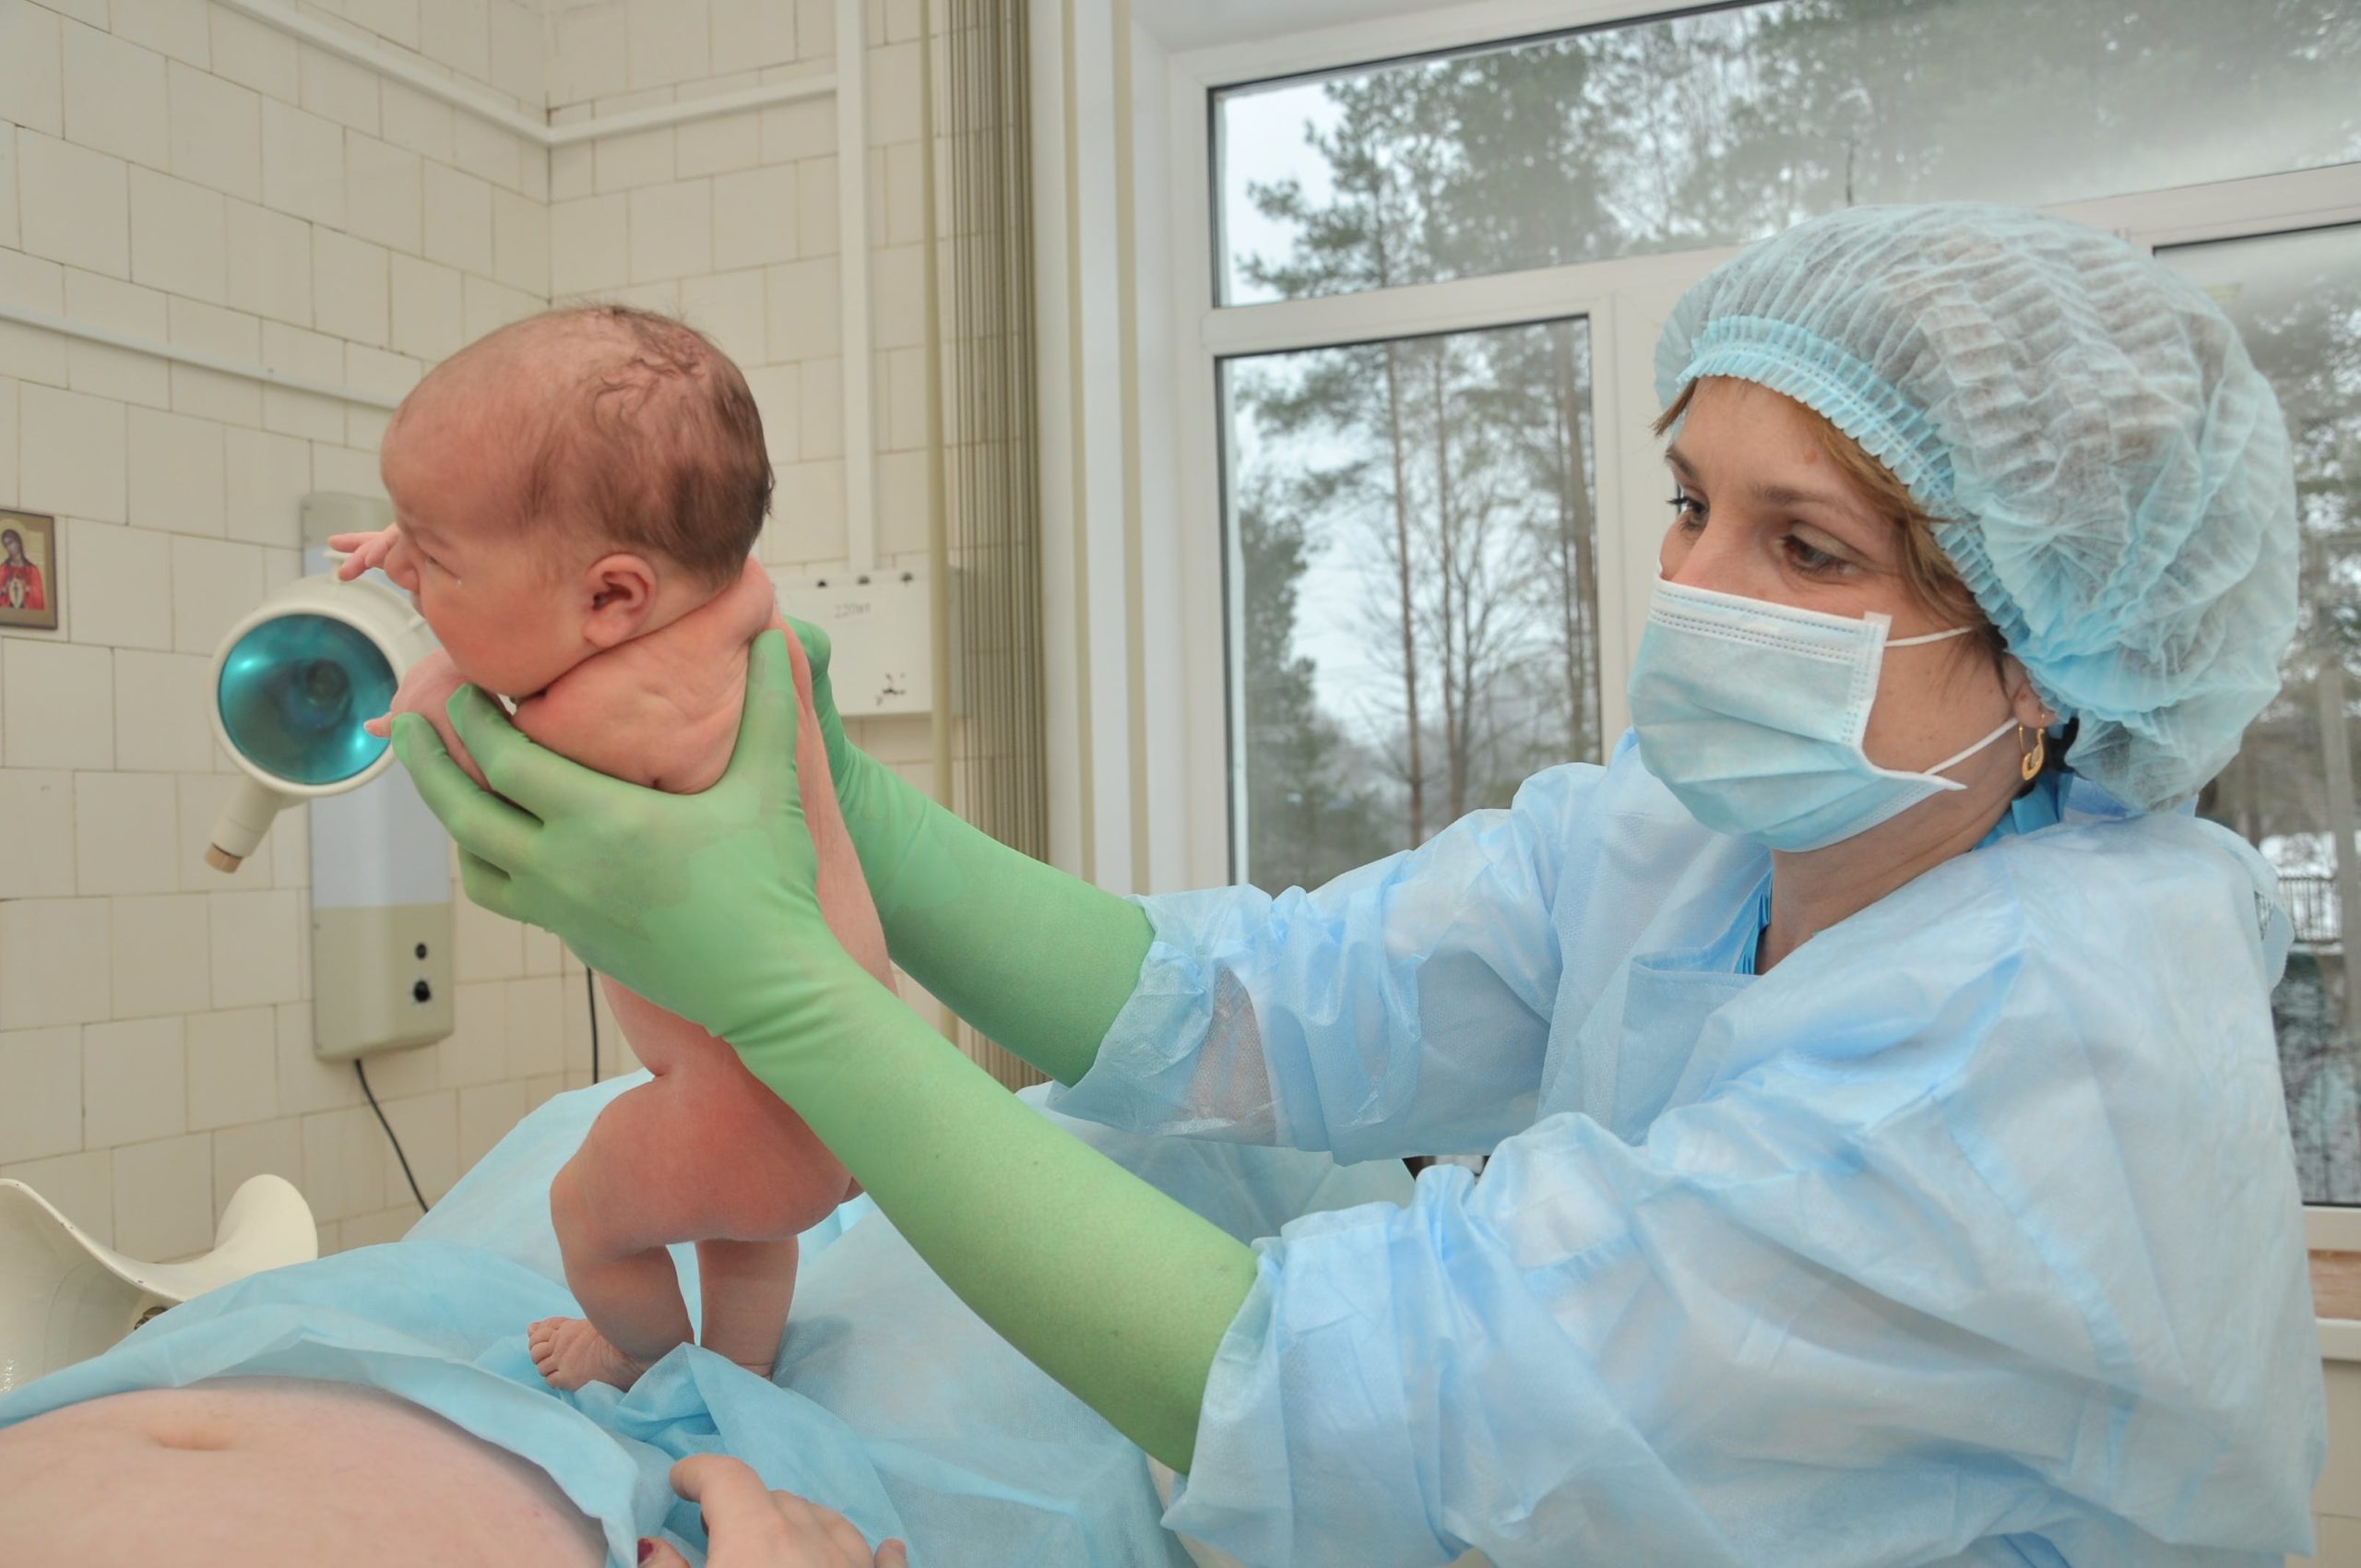 Picture of a newborn held by a healthcare professional